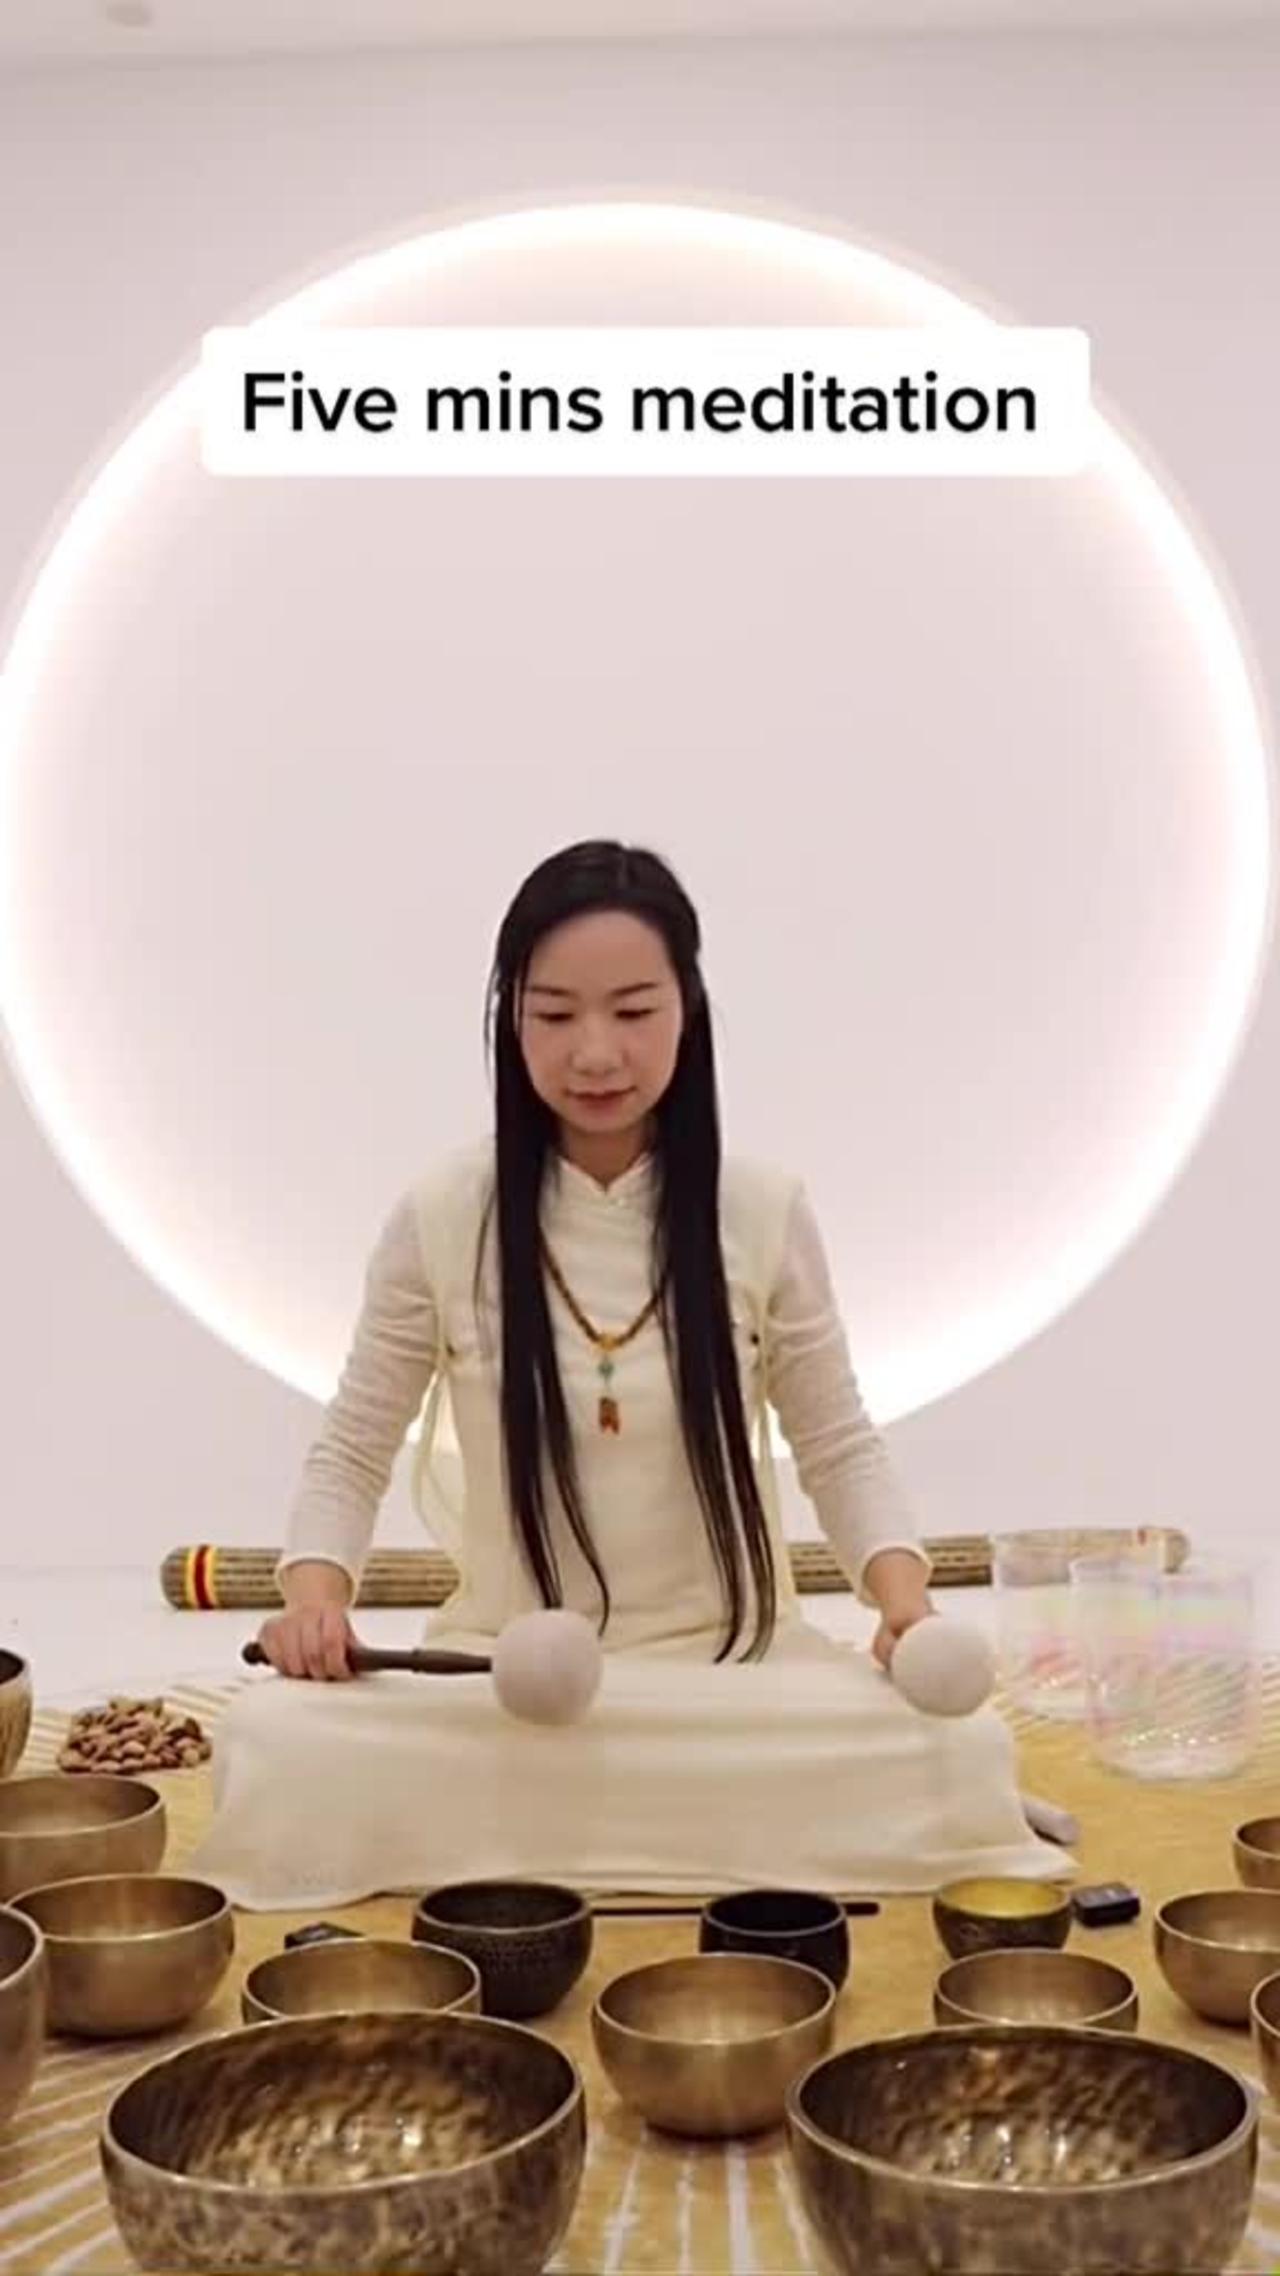 If you don’t sleep well,try this five-minute meditation!#meditation #singingbowls